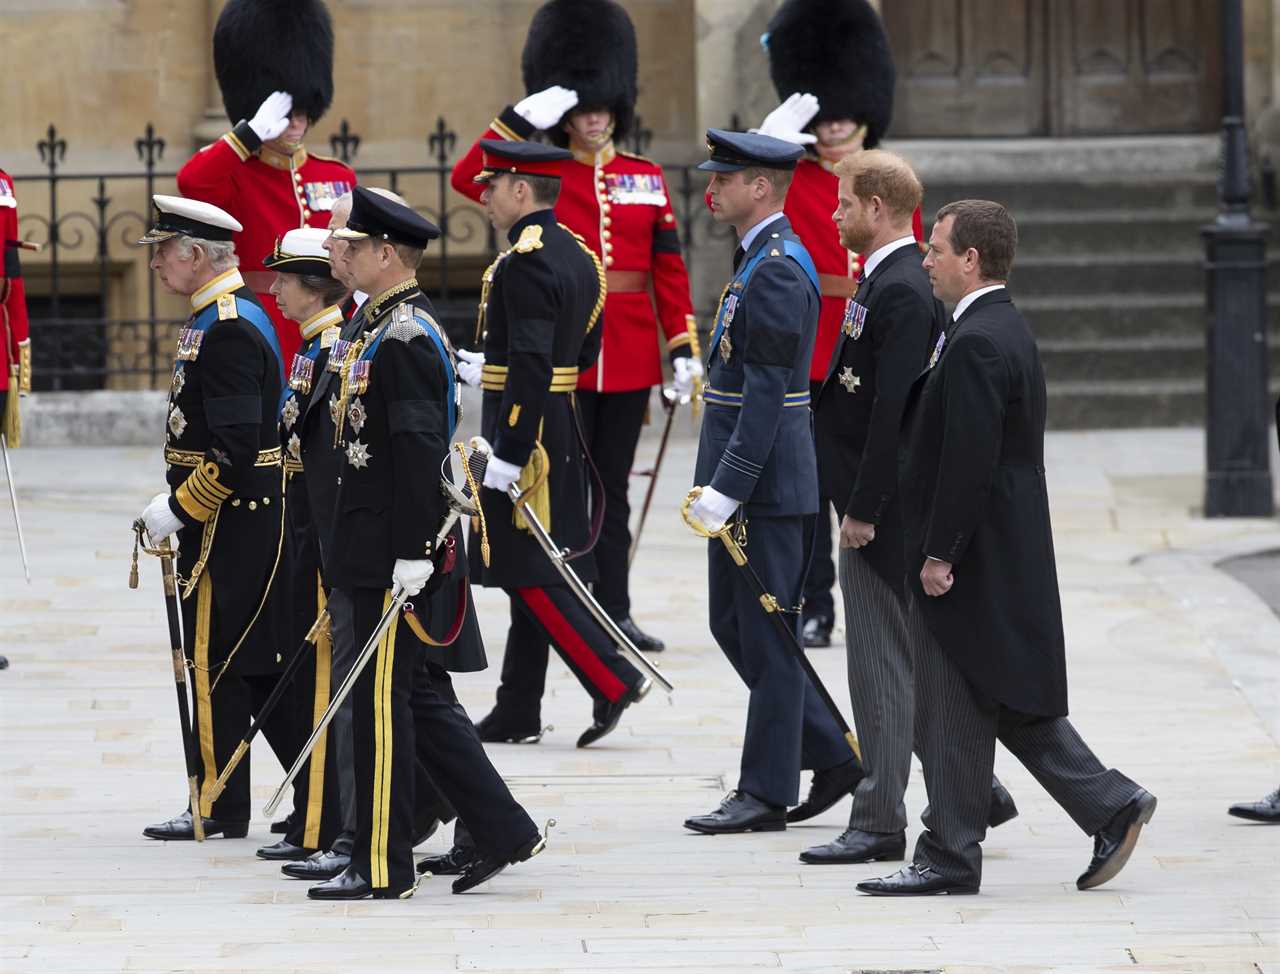 ‘Grief-stricken’ Prince Harry displayed ‘regret’ in glance at Prince William during funeral, body language expert claims